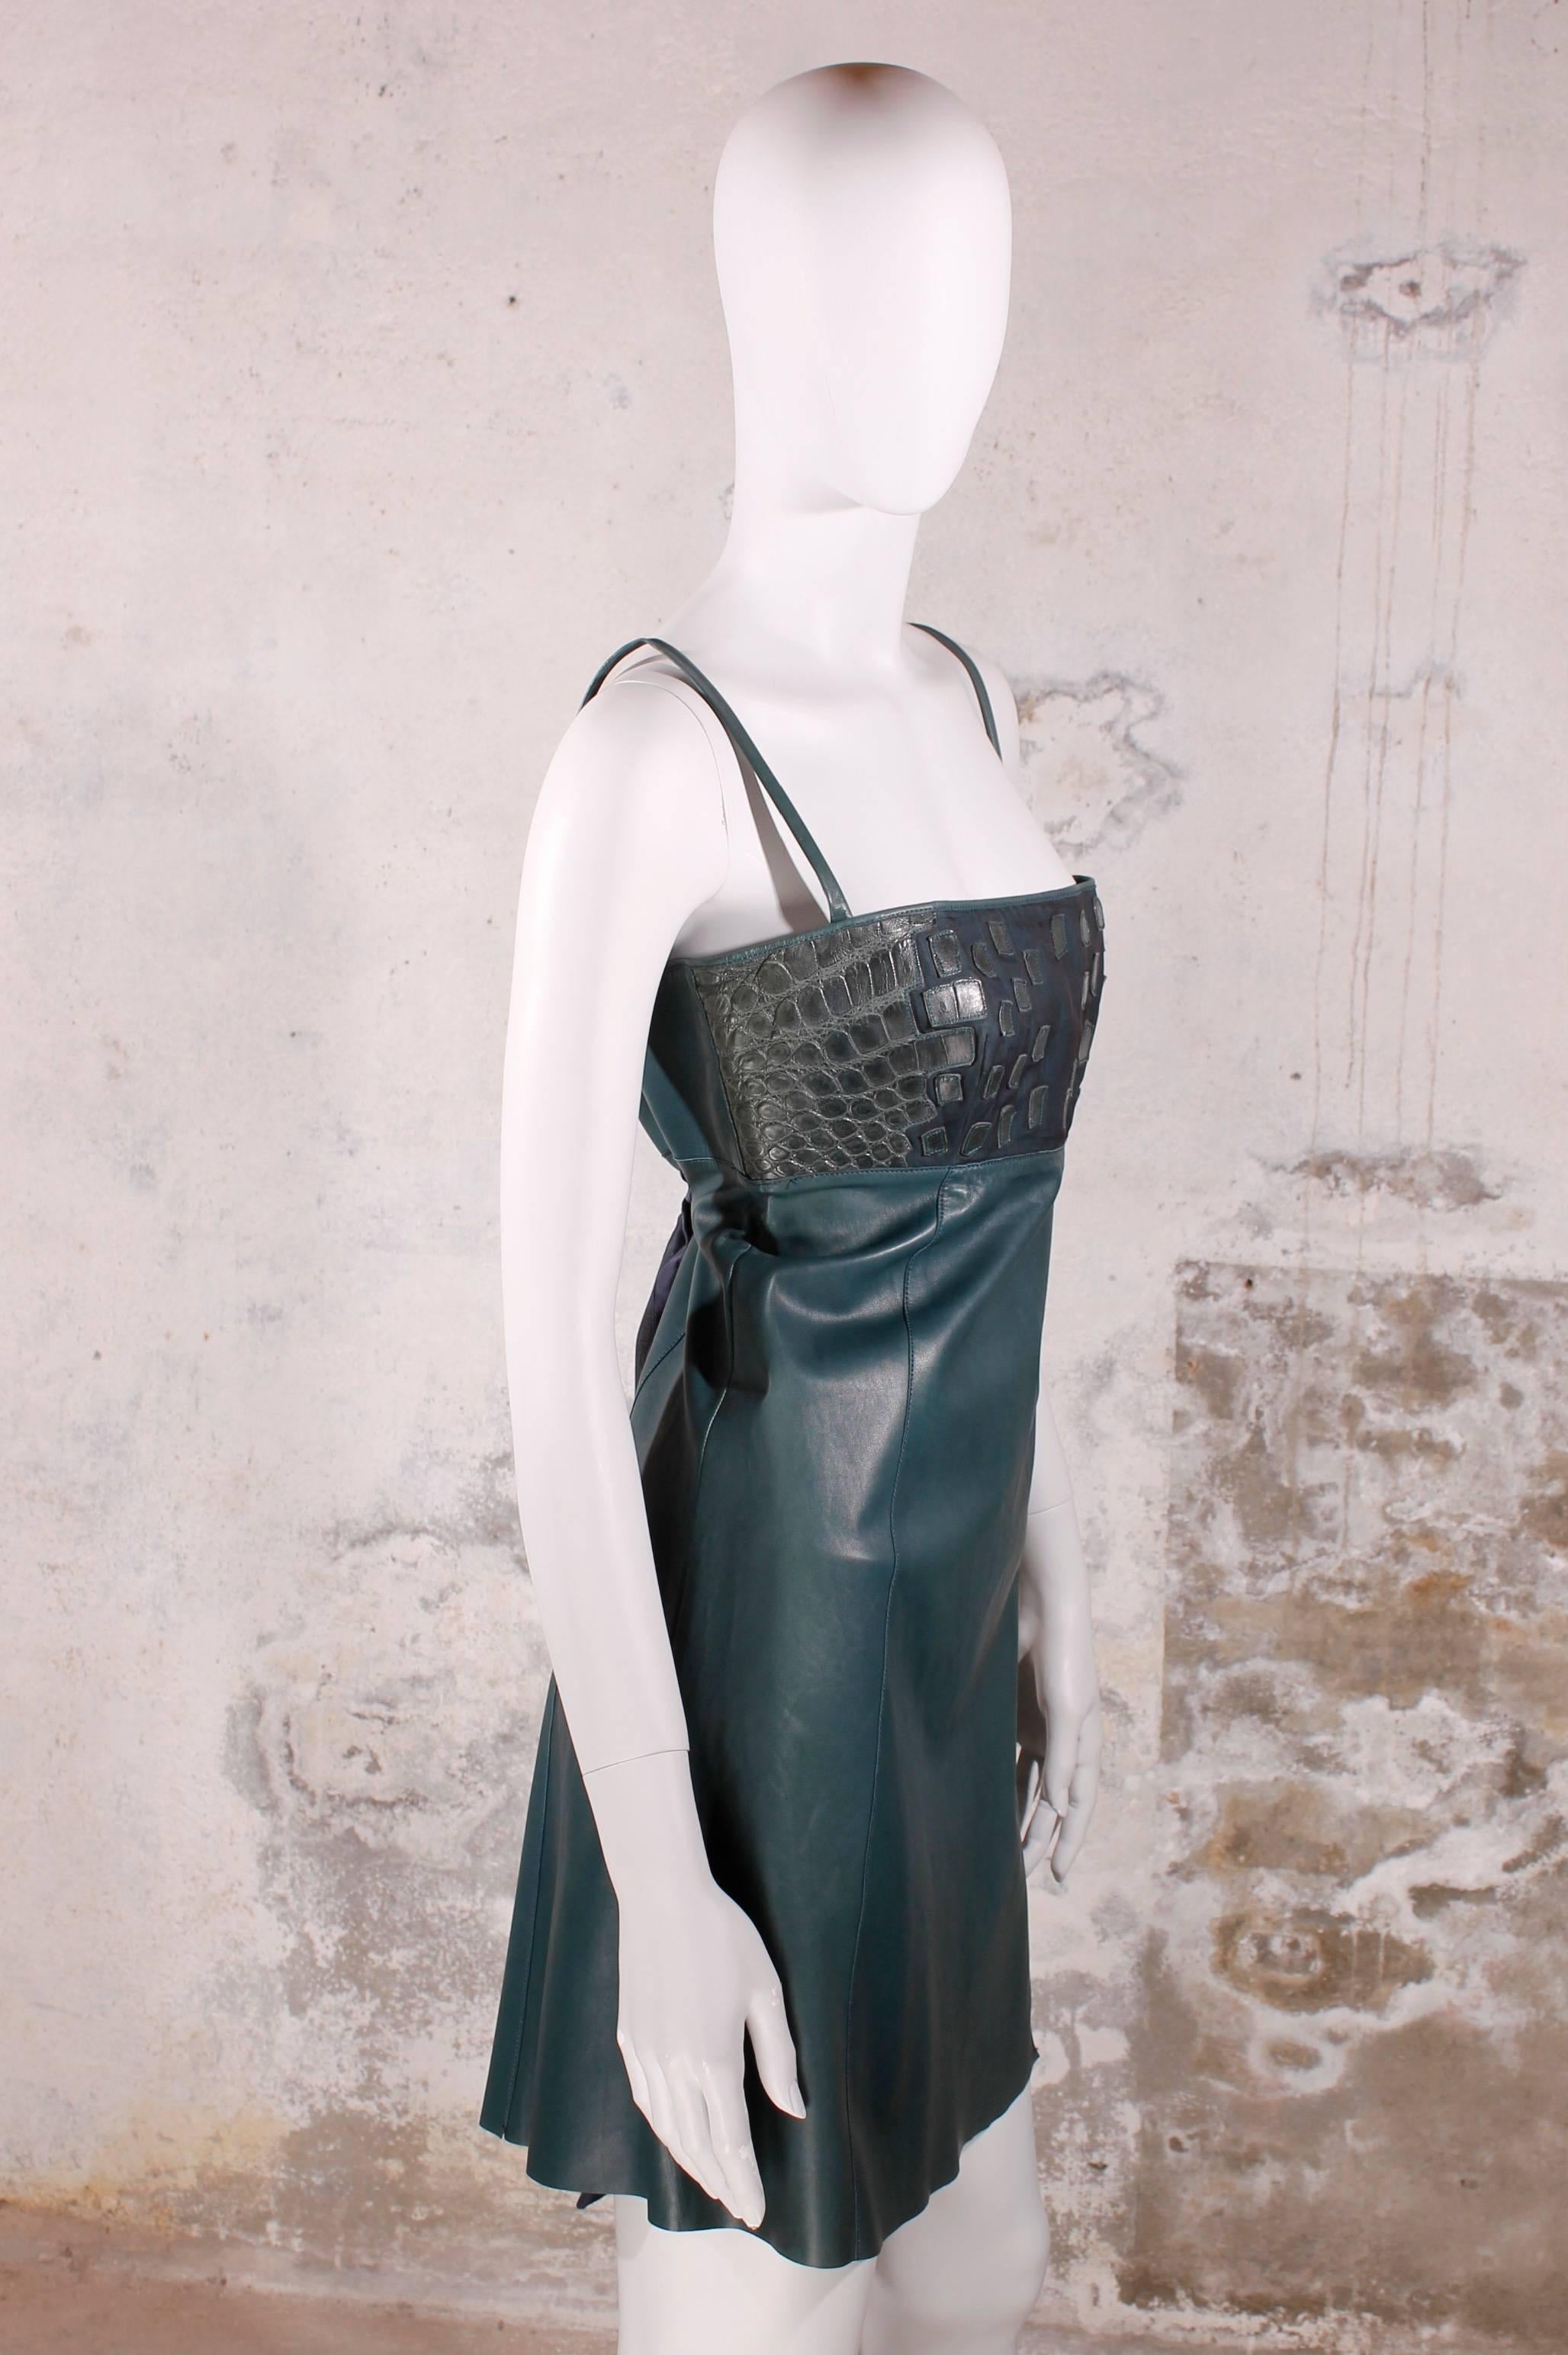 This Jitrois dress is made of leather and silk. 
Really soft lambskin leather in green and the upper part has pieces of genuine crocodile leather. This croco leather is used in larger pieces, but it is also used in small pieces stitched on the silk